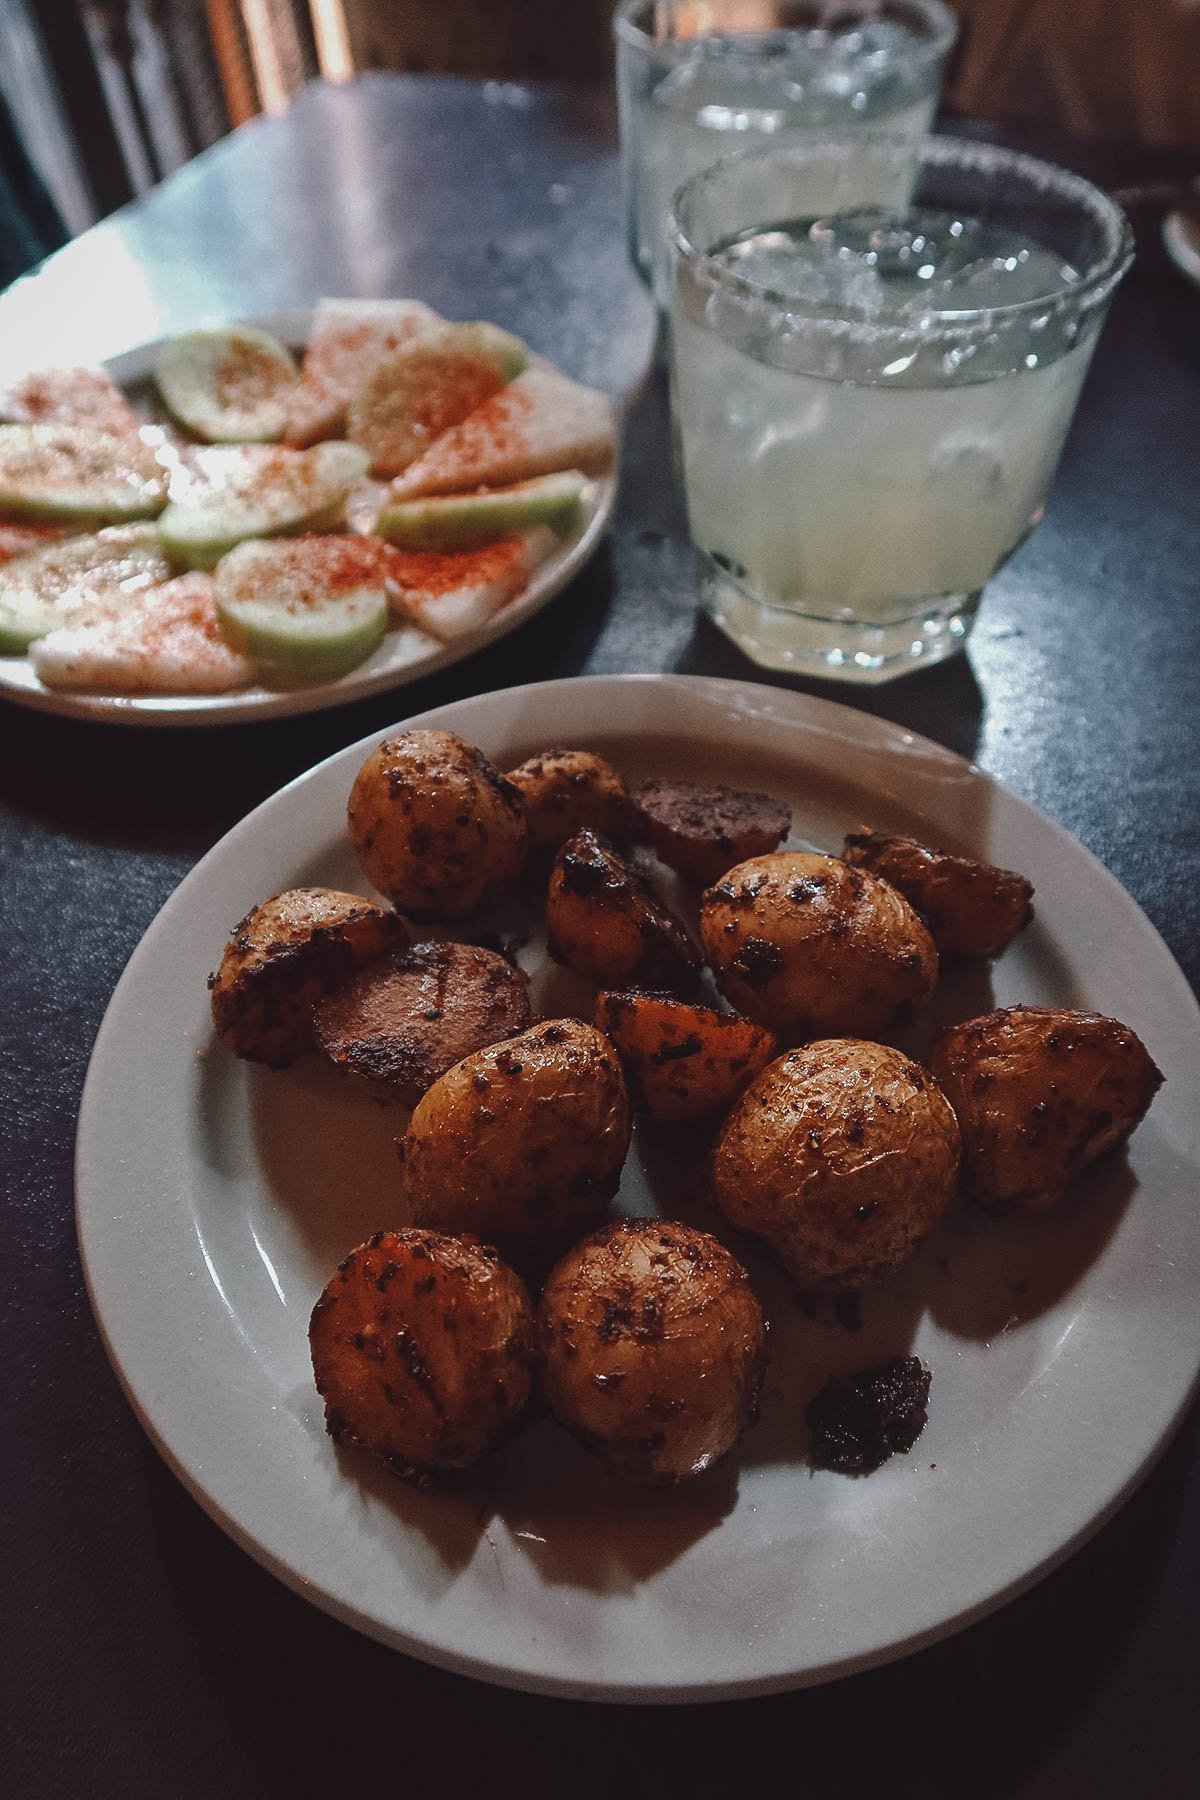 Tapas and cocktails at a bar in Guanajuato